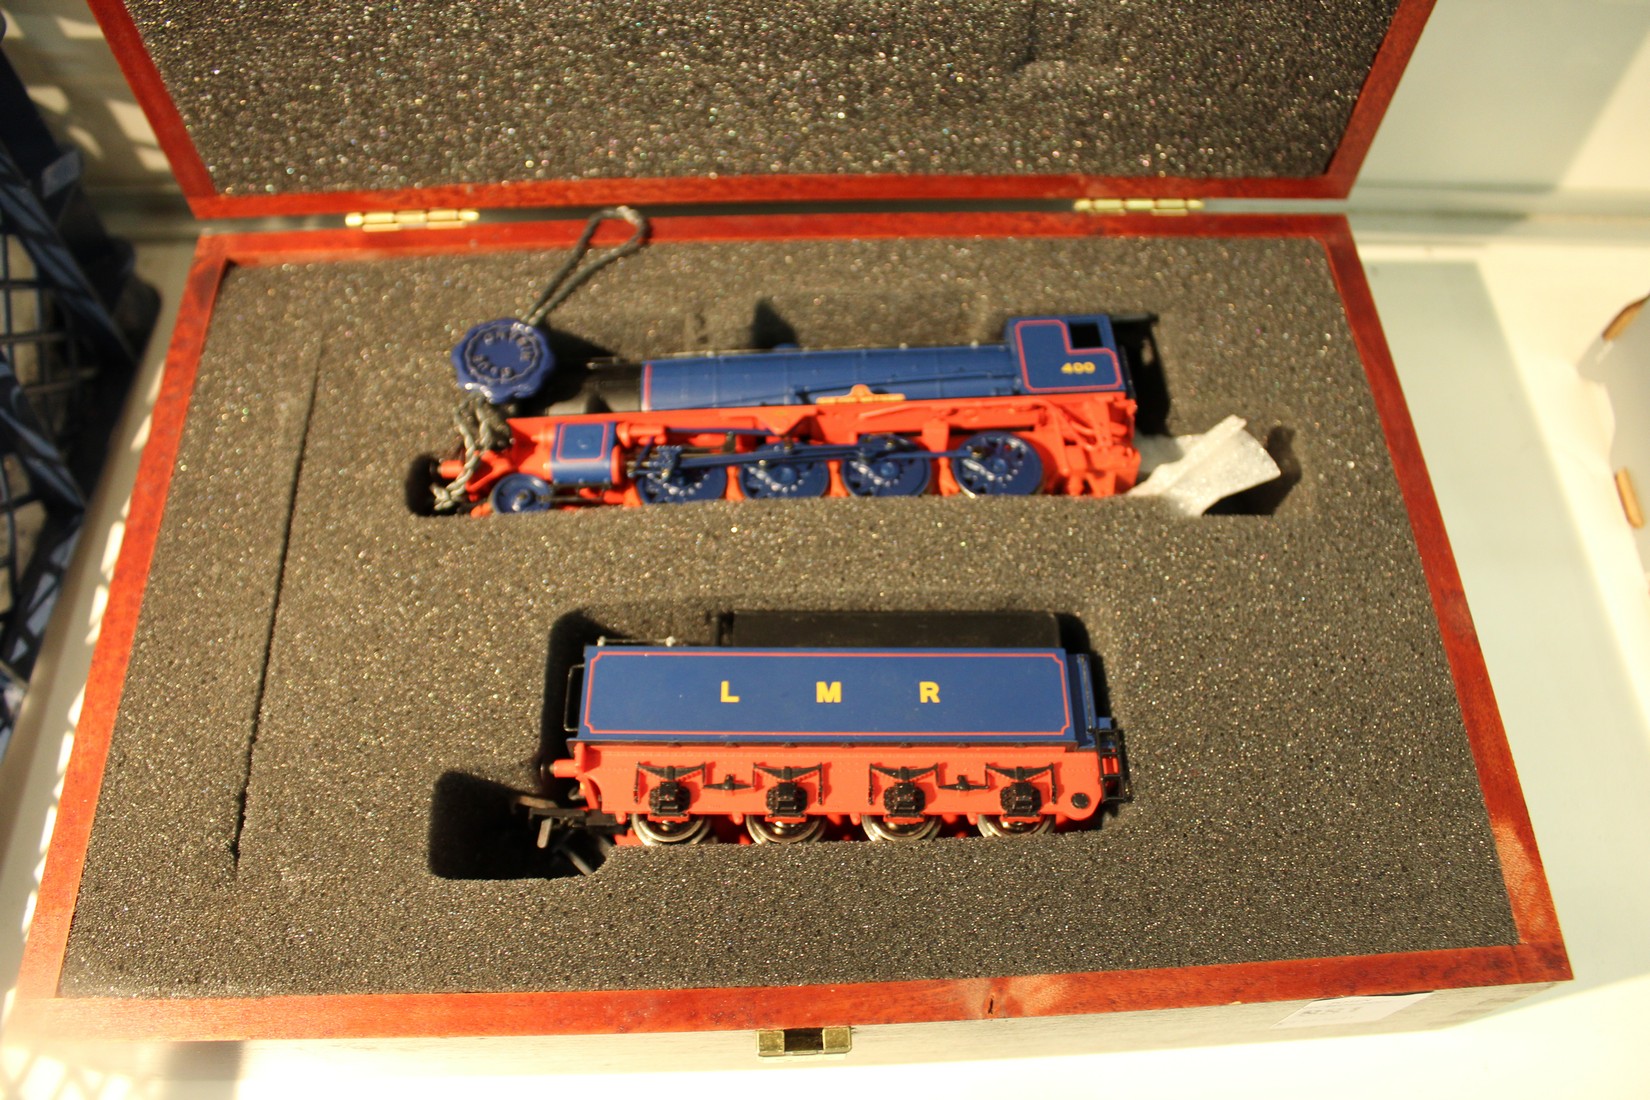 A Bachmann railway locomotive with matching tender in a fitted wooden case.